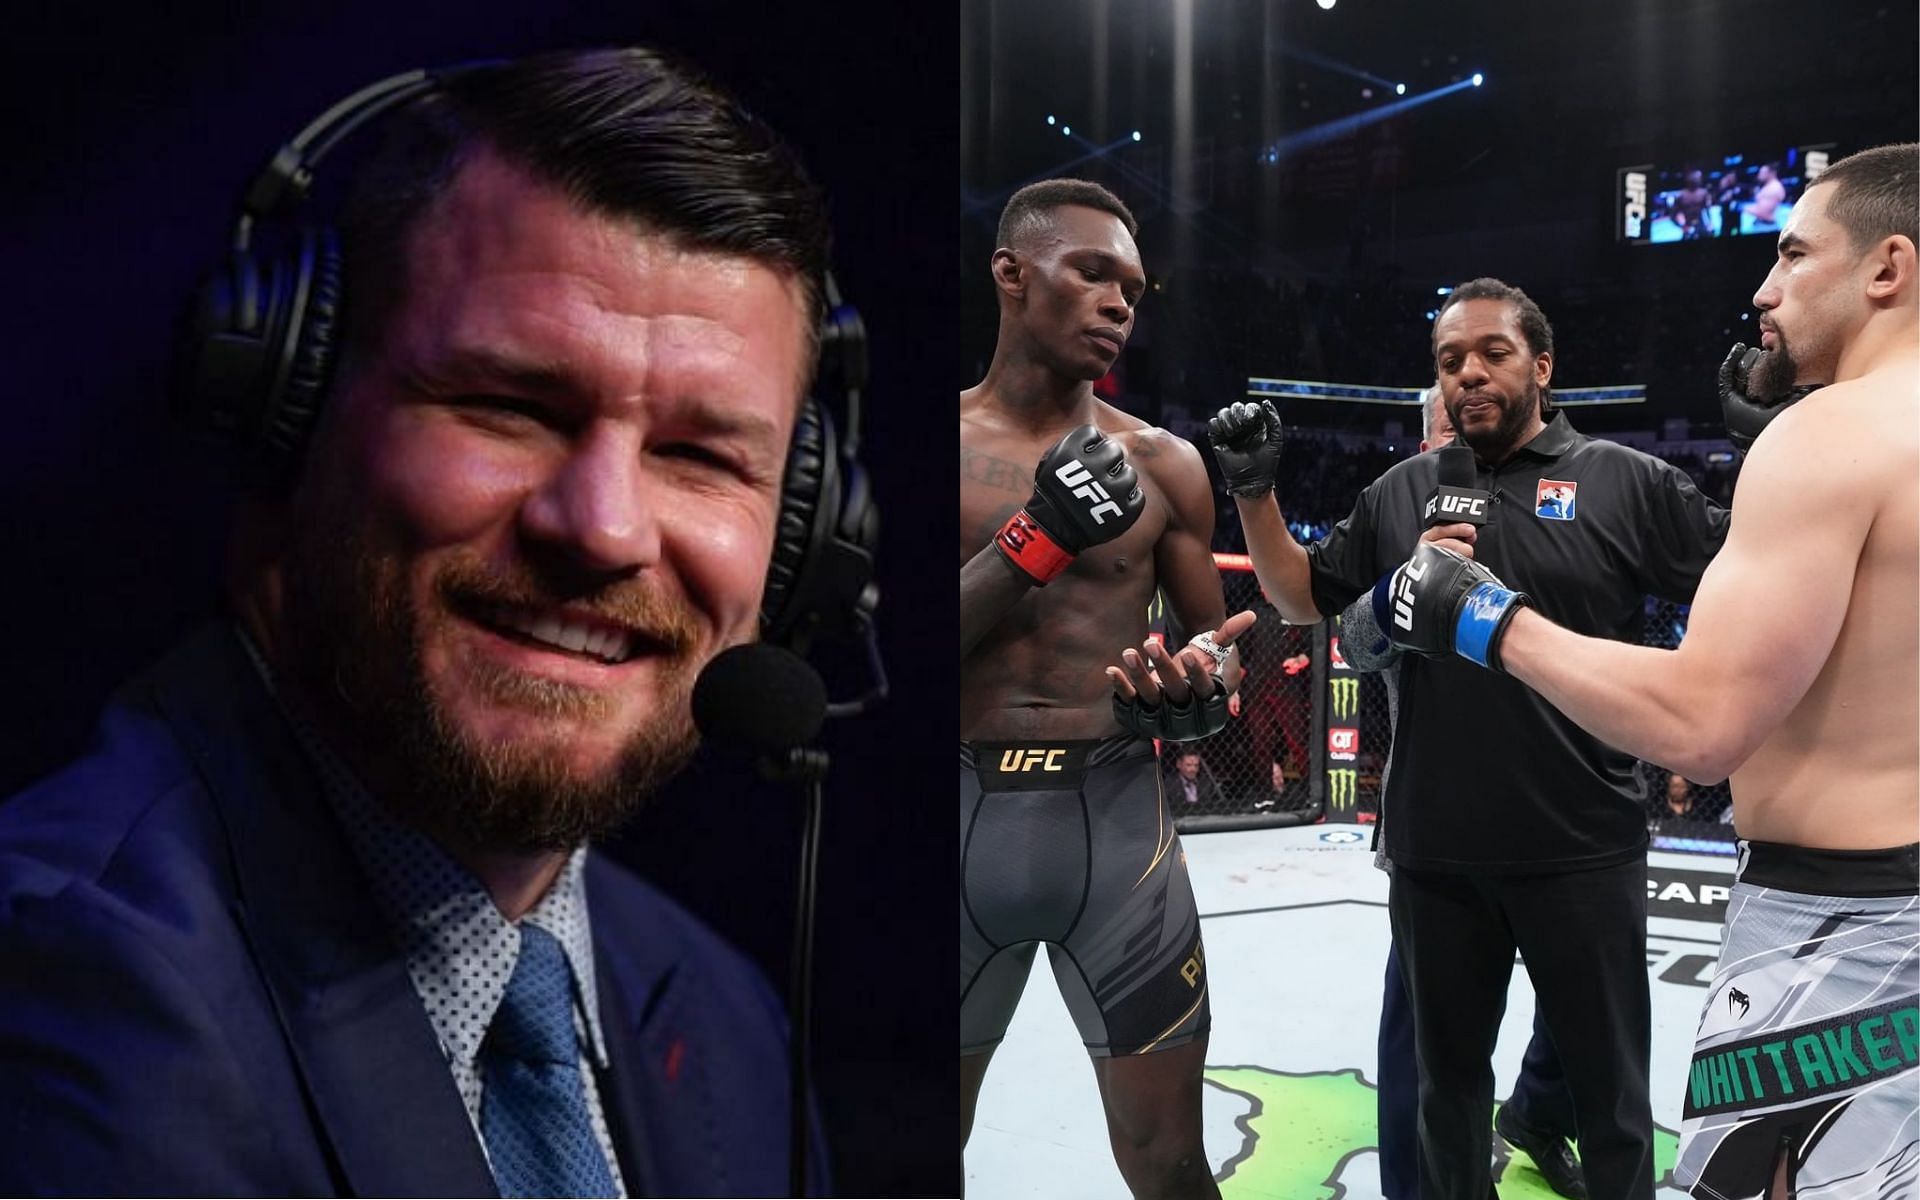 Michael Bisping (left), Israel Adesanya and Robert Whittaker (right) [Image credits: Getty and UFC]